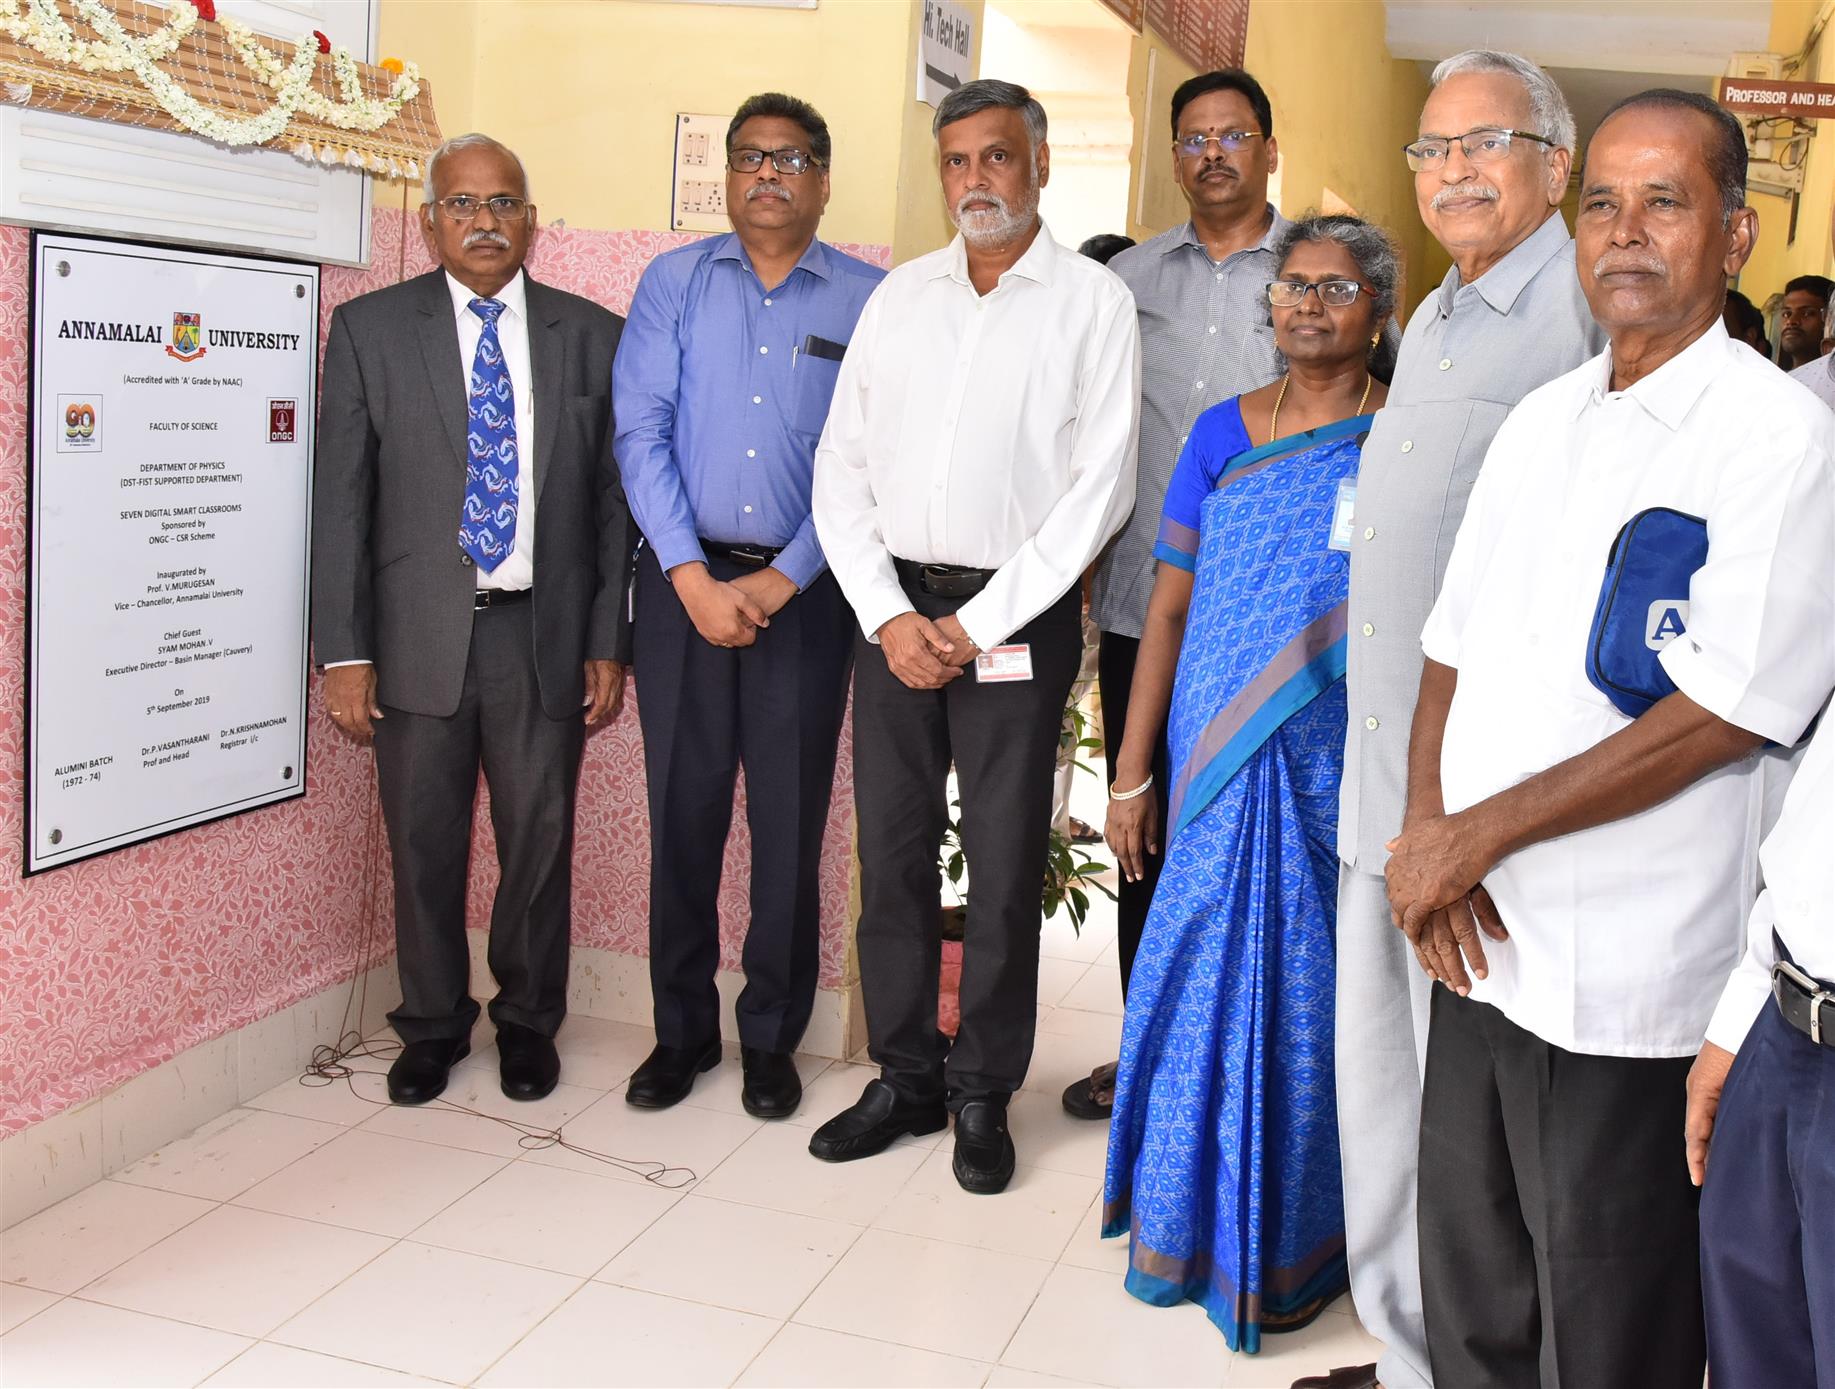 SevenSMART class rooms installed at Annamalai University, Chidambaramsupported by ONGC Cauvery Basin, Chennai under CSR initiative being inauguratedby Prof. V Murugesan, Vice Chancellor, Annamalai University in presence of Mr. Syam Mohan V, Executive Director, ONGC Cauvery Basin, Chennai.